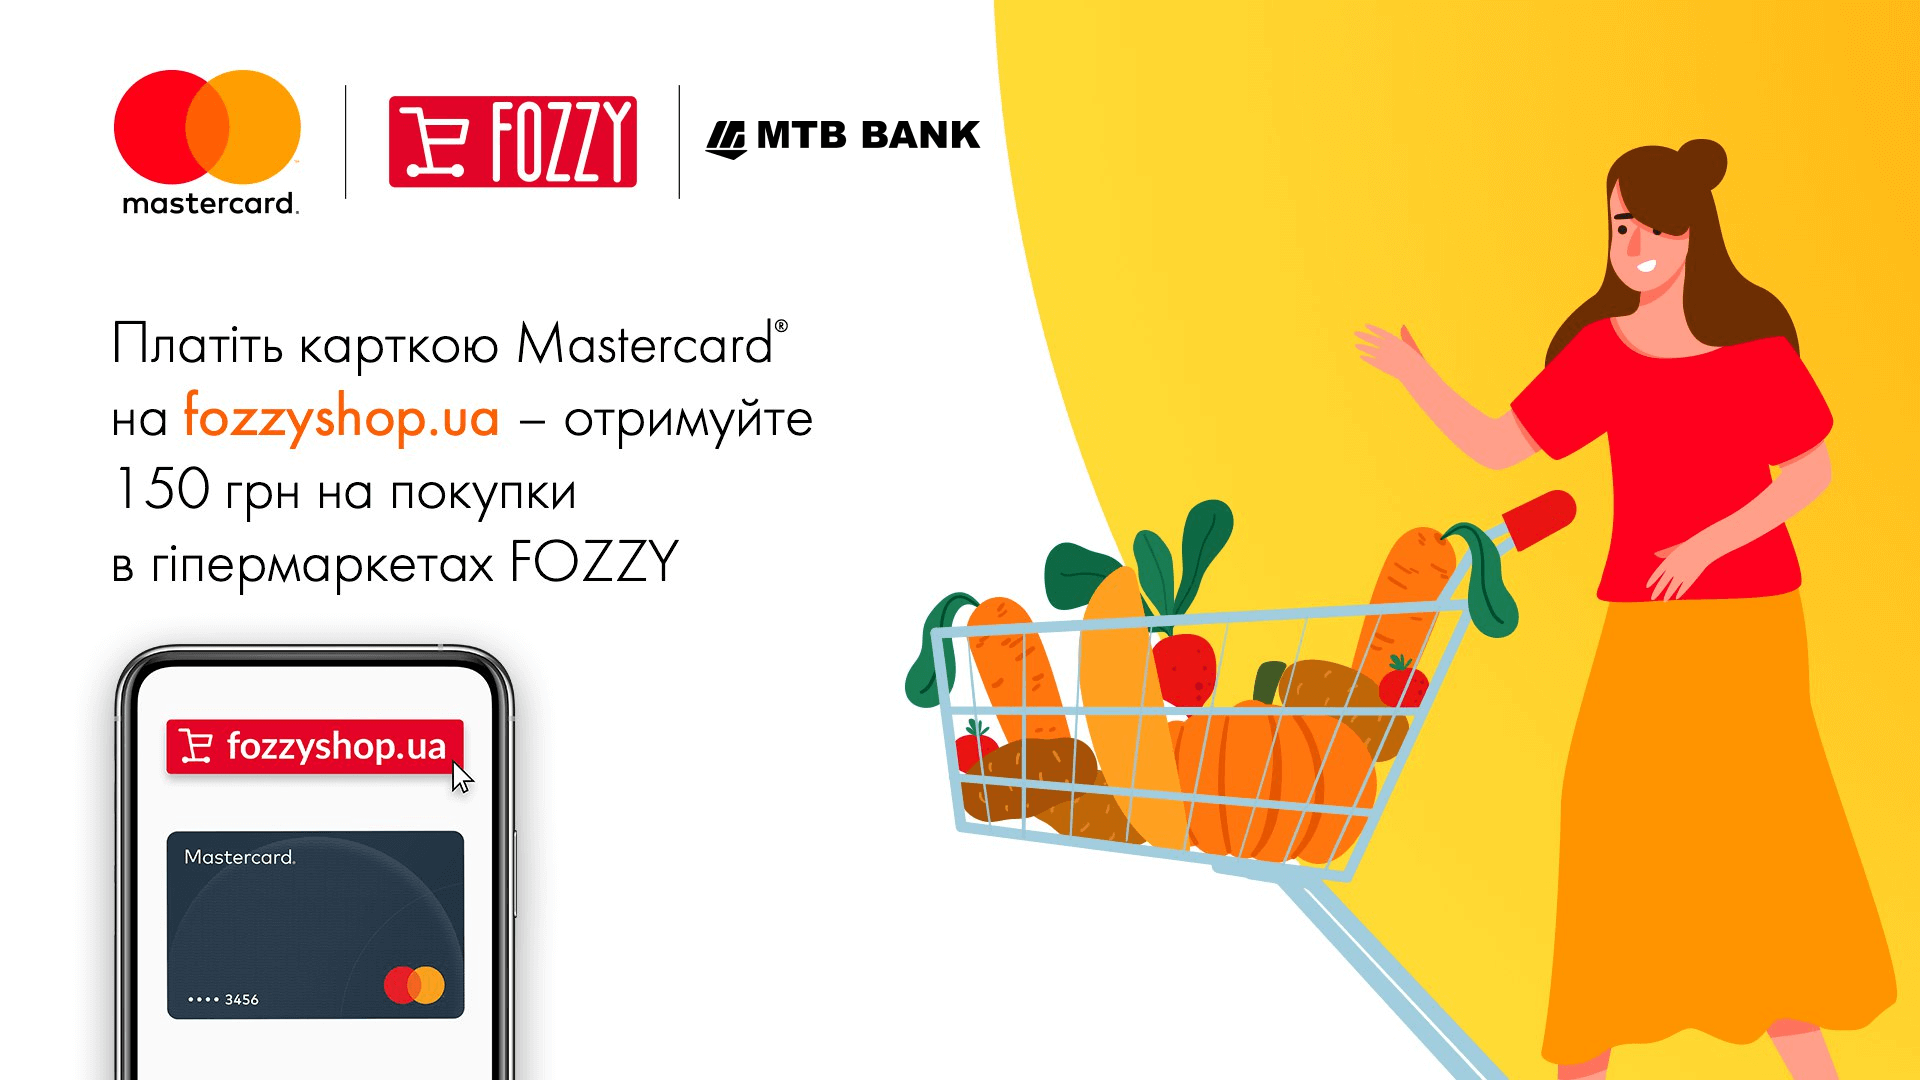 Buy conveniently - eat deliciously with Mastercard and fozzy! - photo - mtb.ua